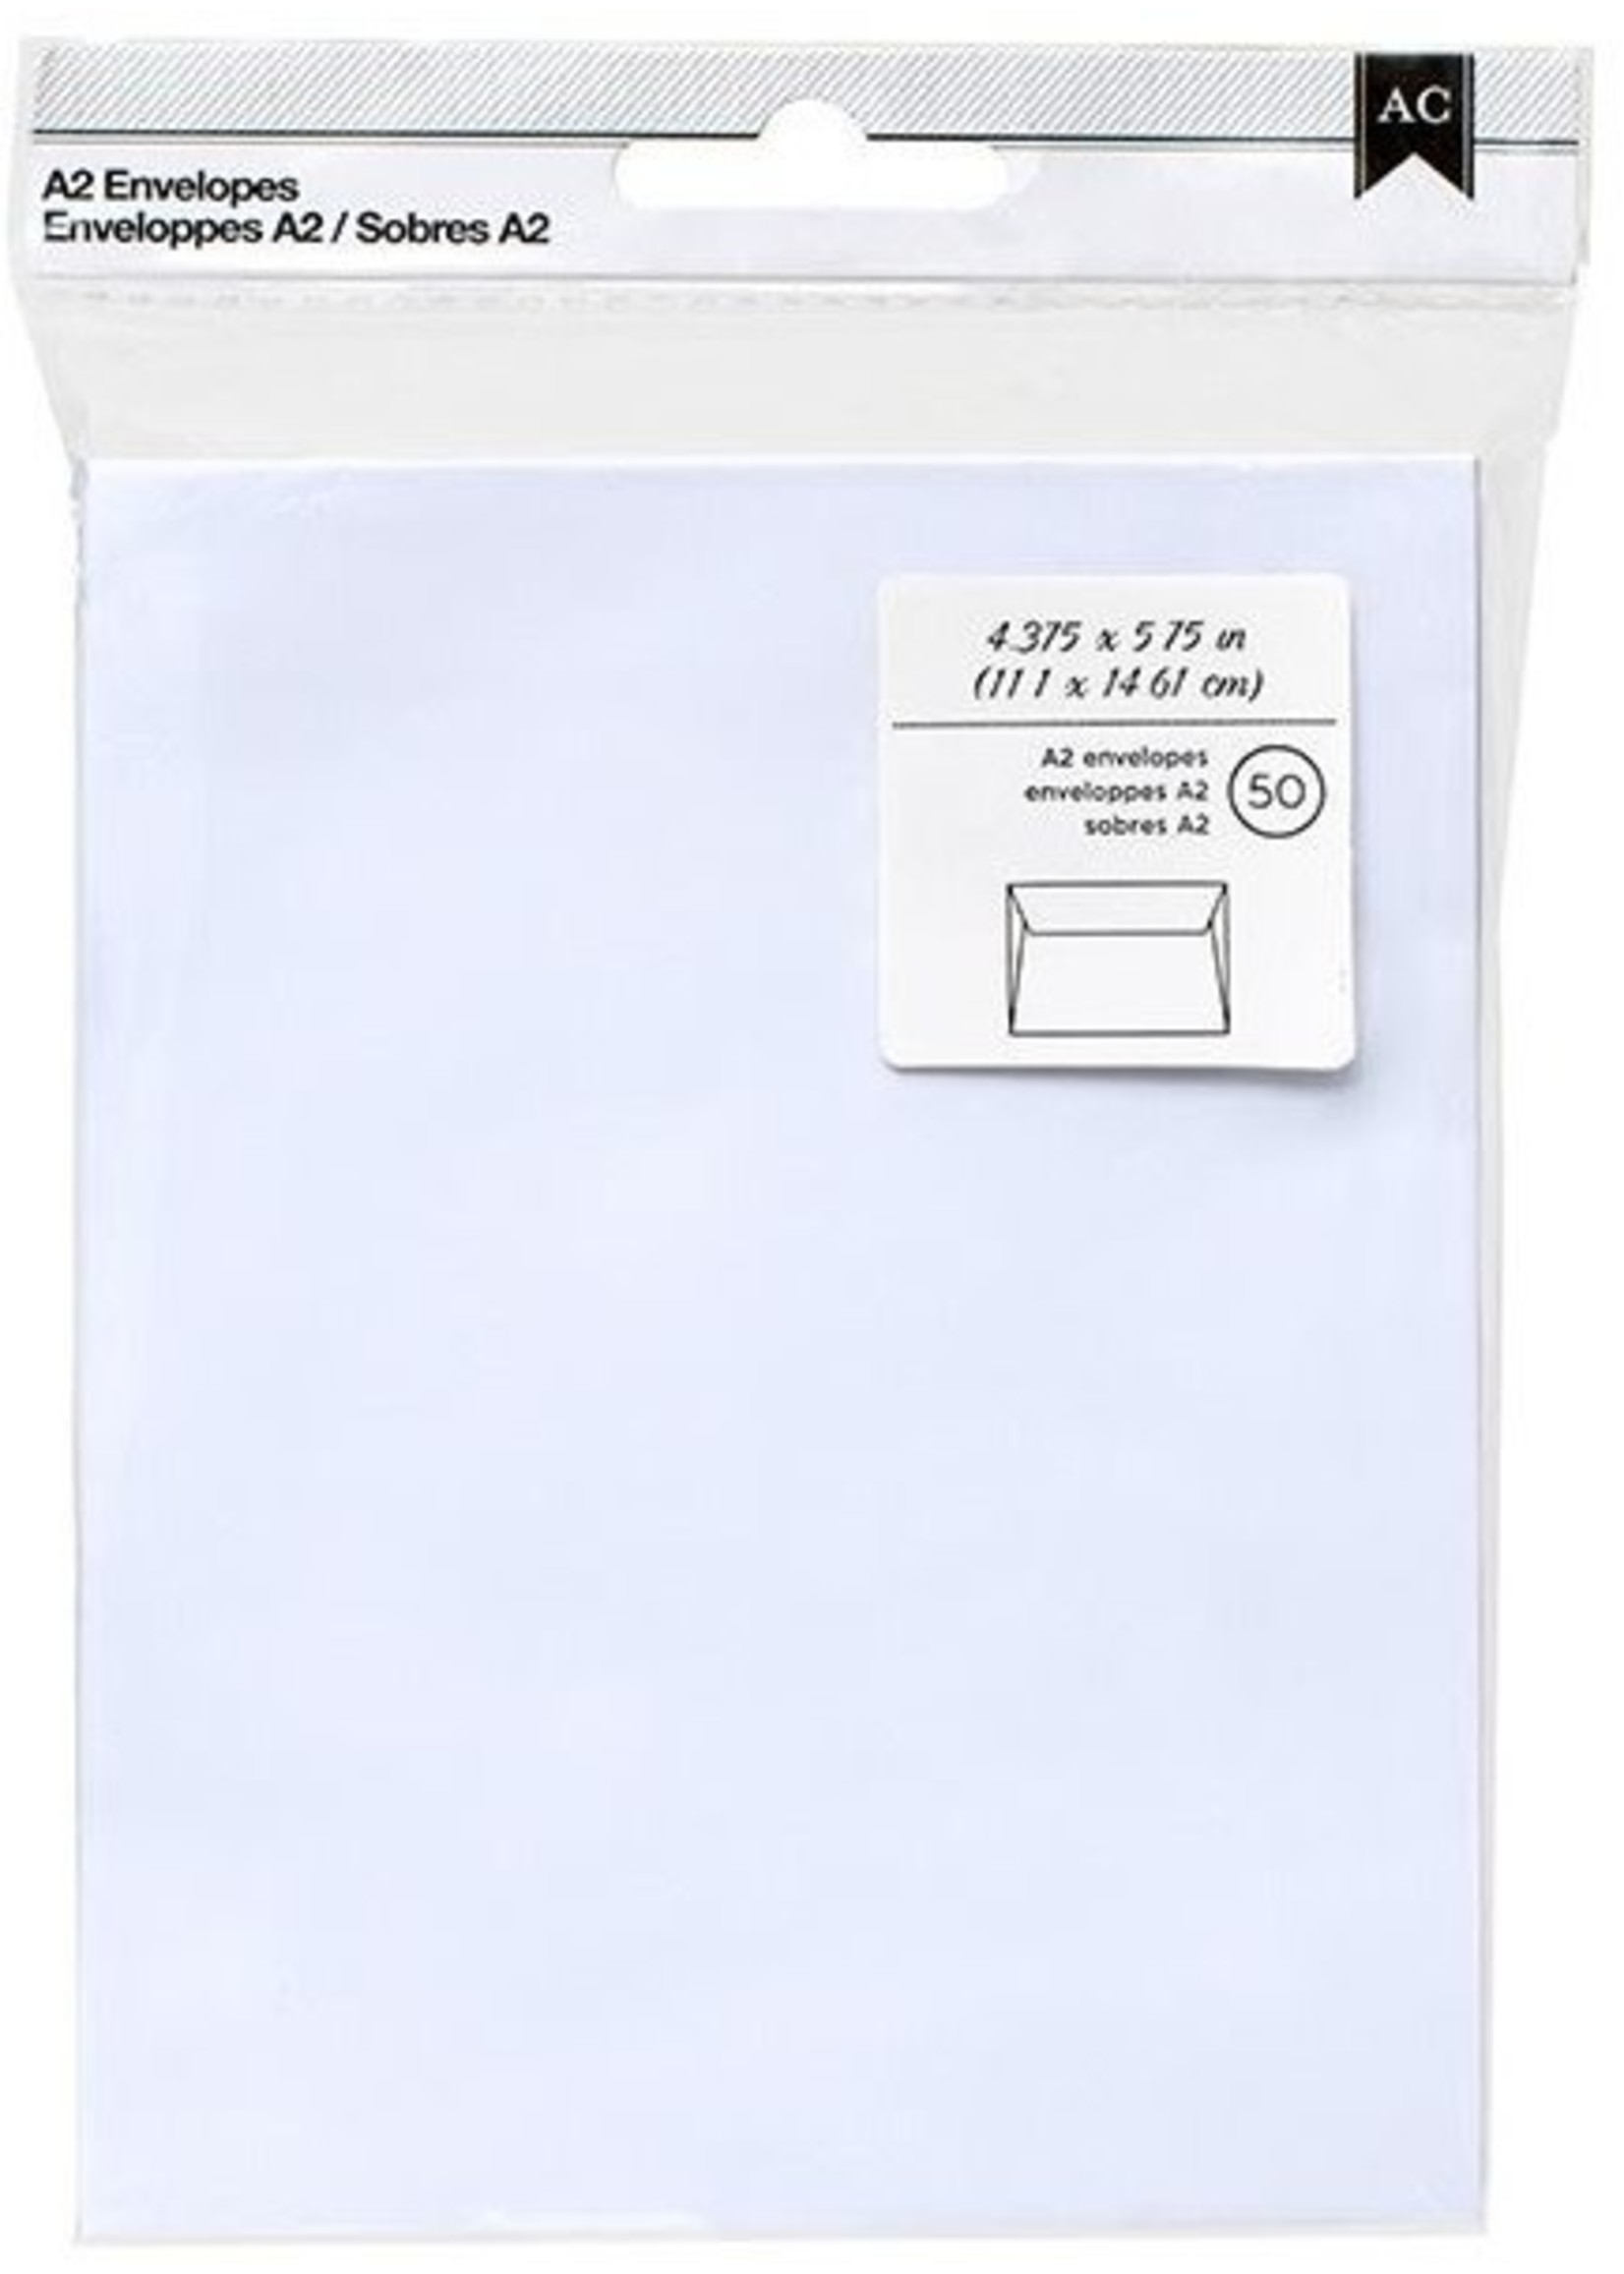 American Crafts AC A2 Envelopes (50), White